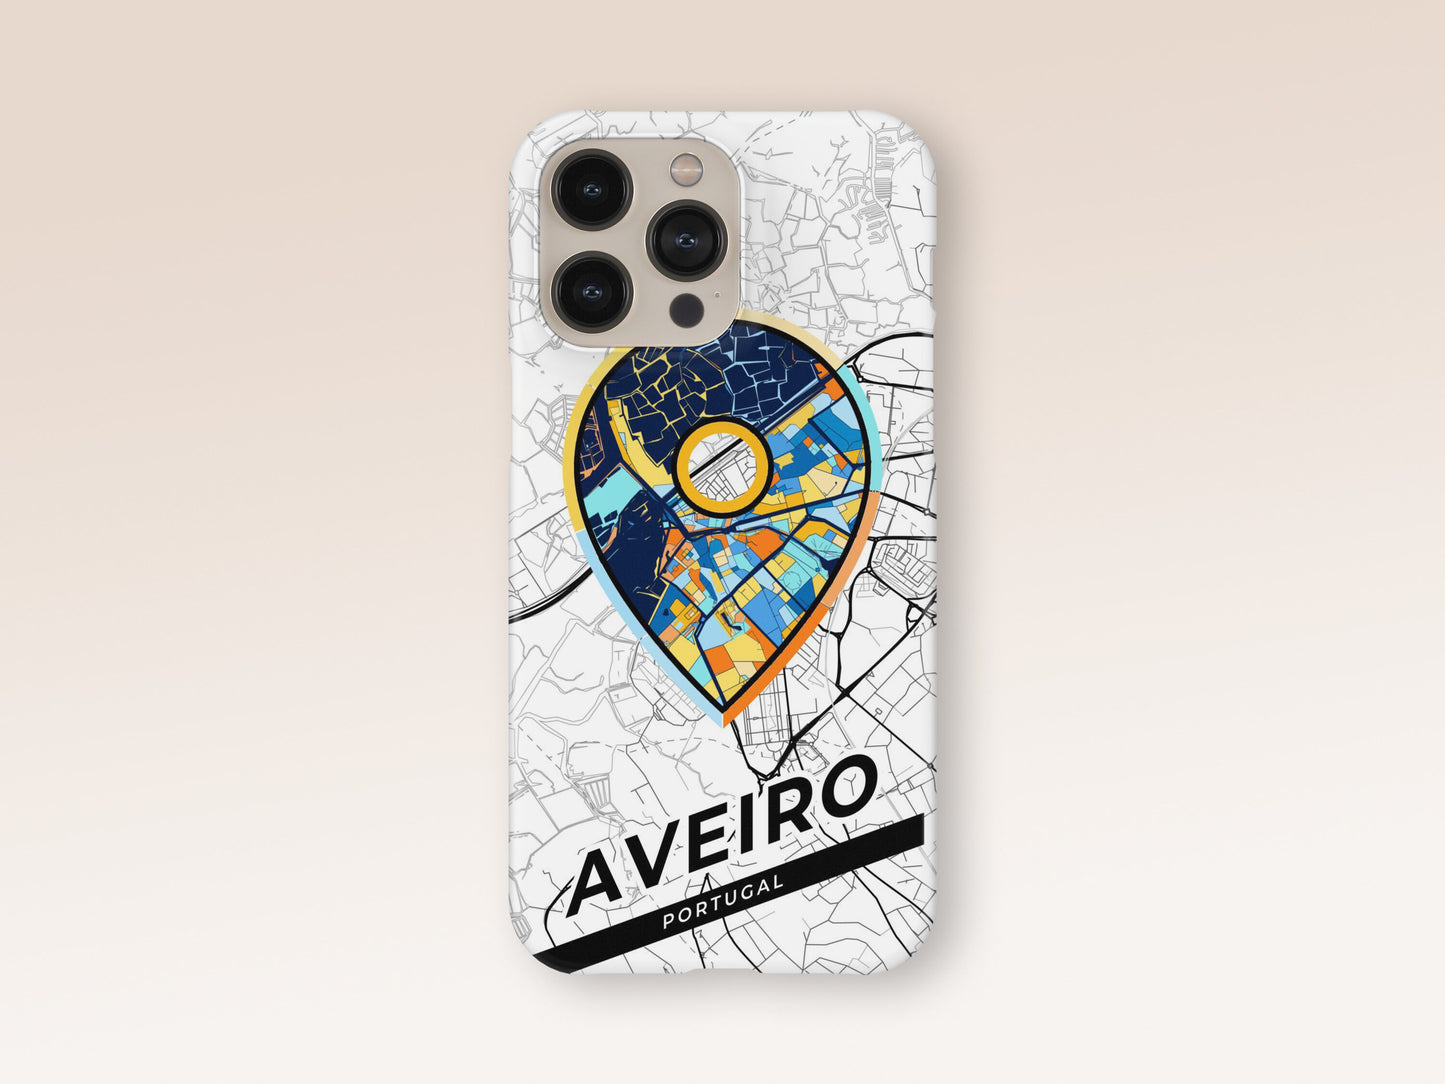 Aveiro Portugal slim phone case with colorful icon. Birthday, wedding or housewarming gift. Couple match cases. 1